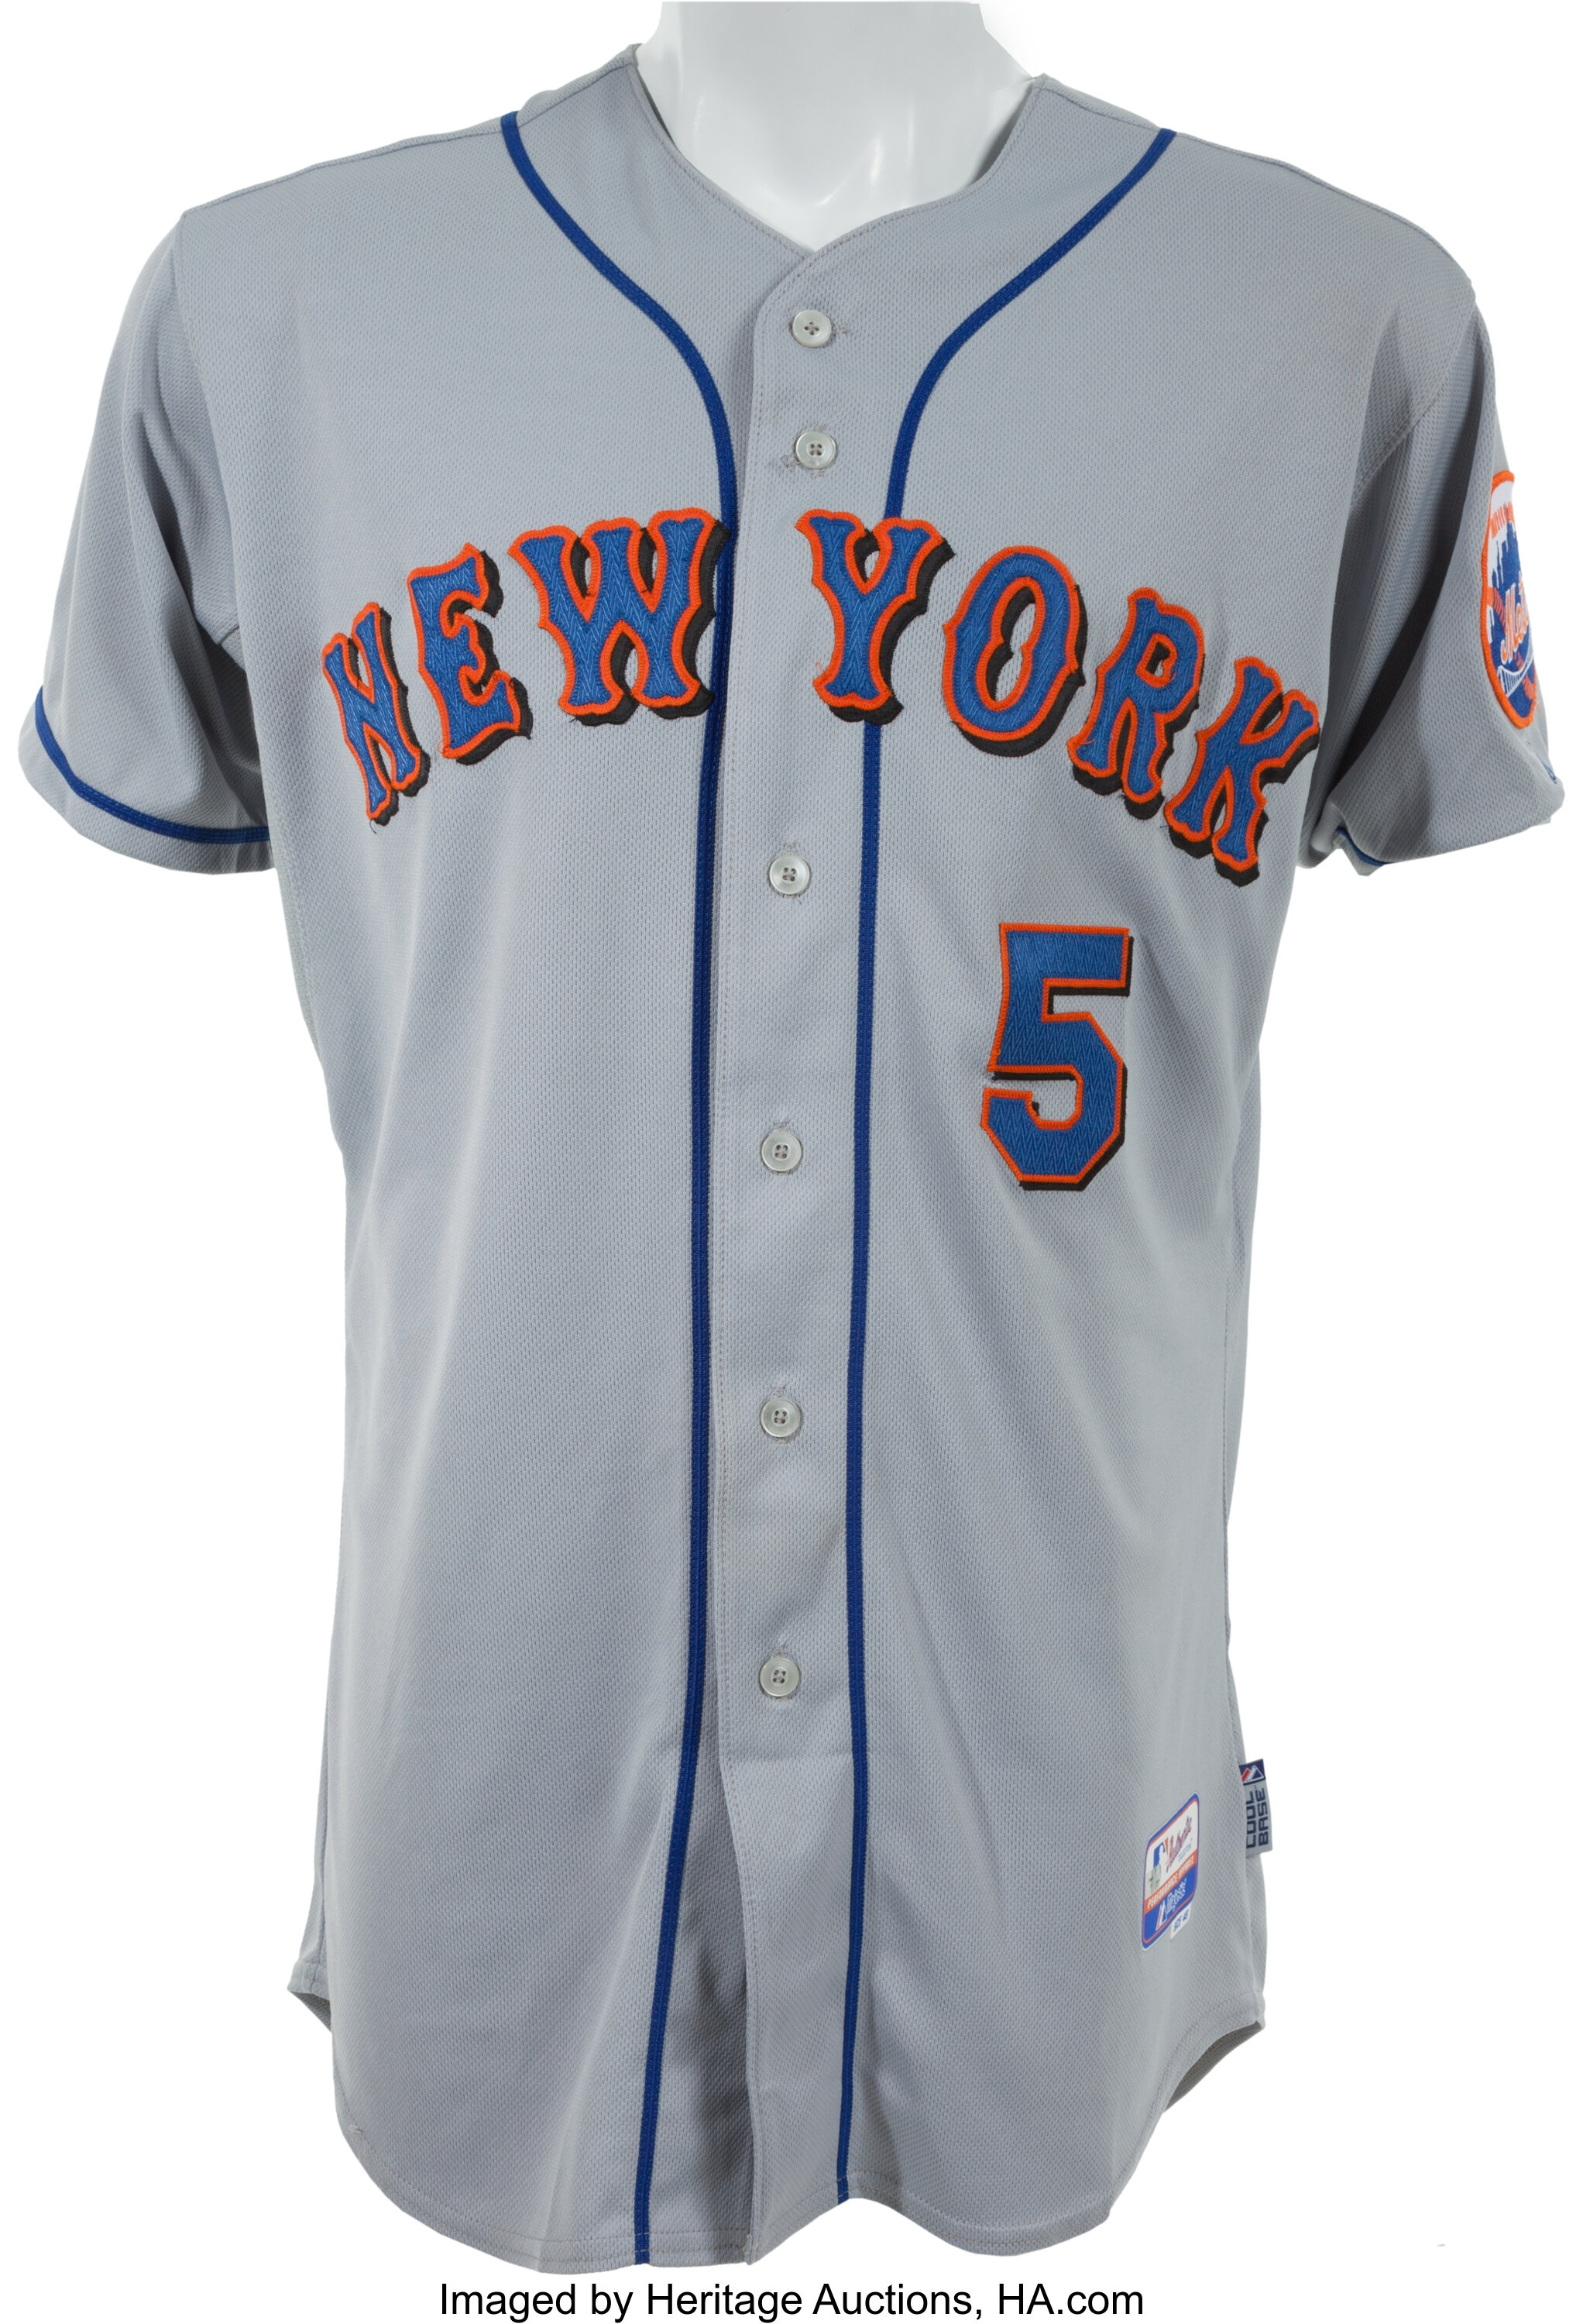 New York Mets Signed Jerseys, Collectible Mets Jerseys, New York Mets  Memorabilia Jerseys